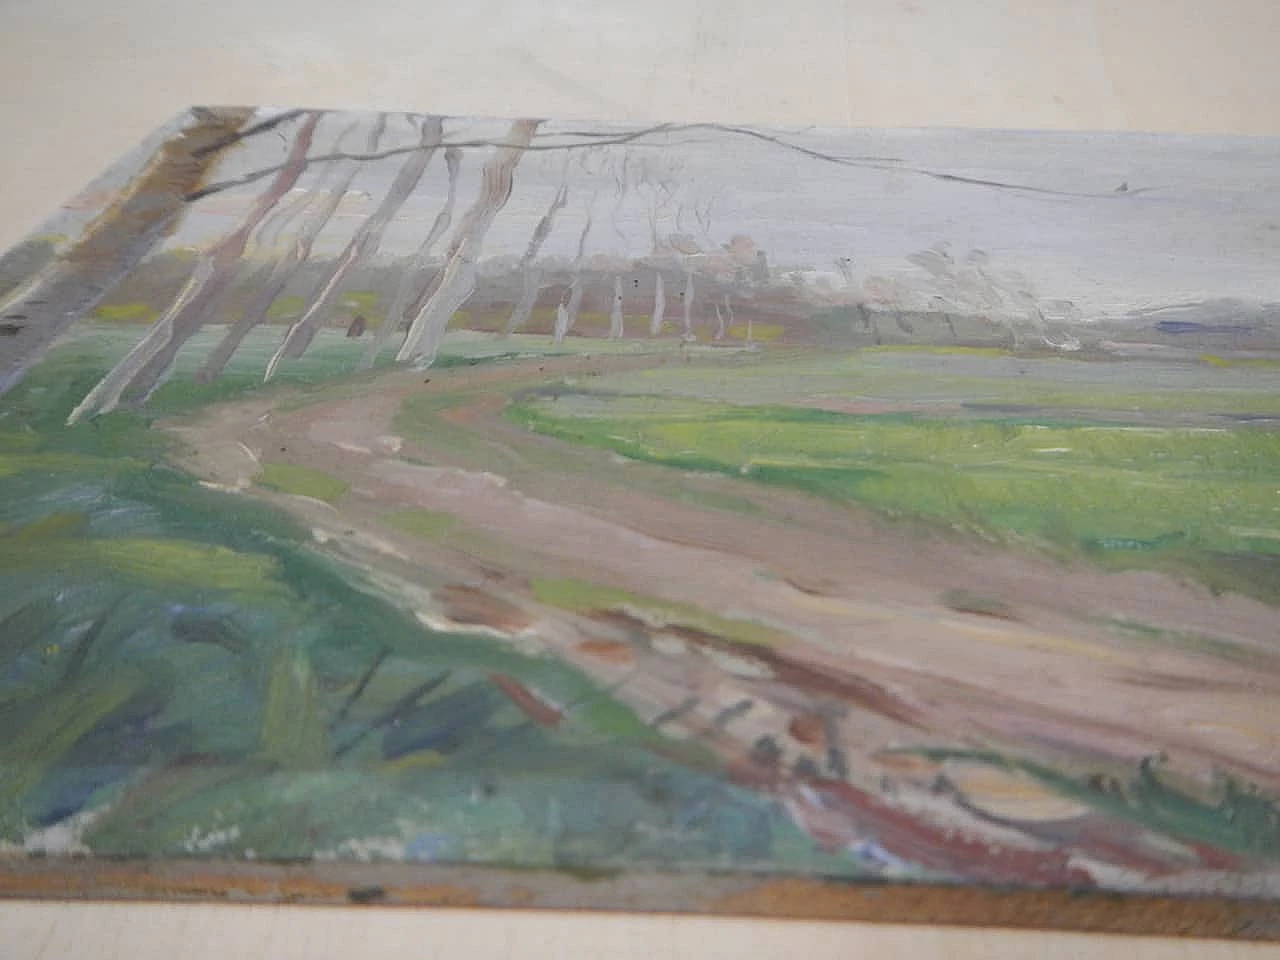 Des Champs, road, painting on wood, early 20th century 5